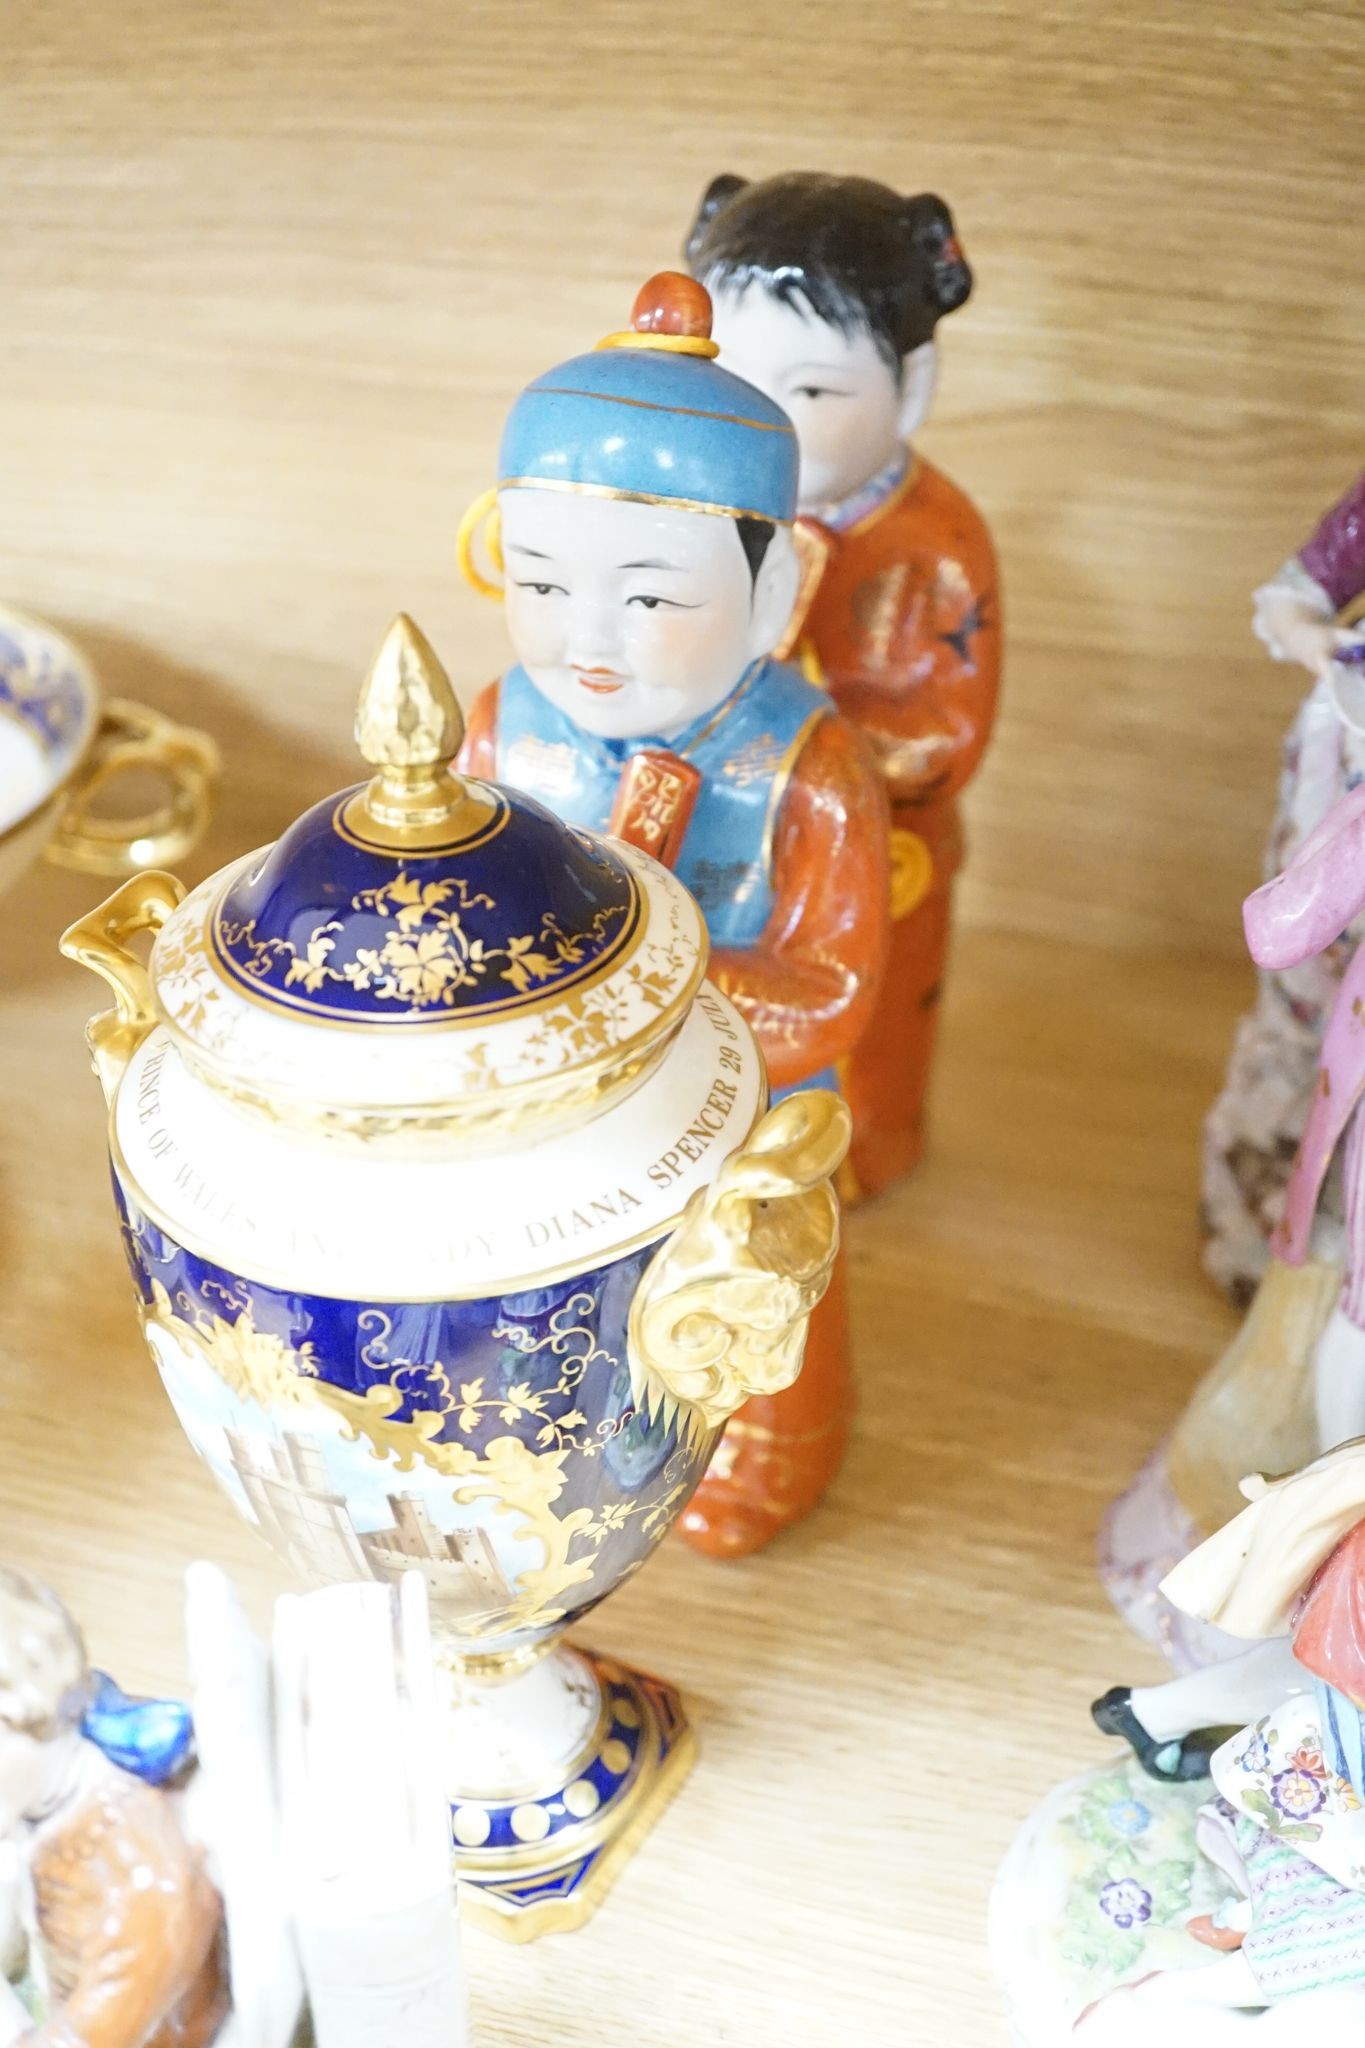 A collection of German and French porcelain figurines, Coalport commemorative urn etc.